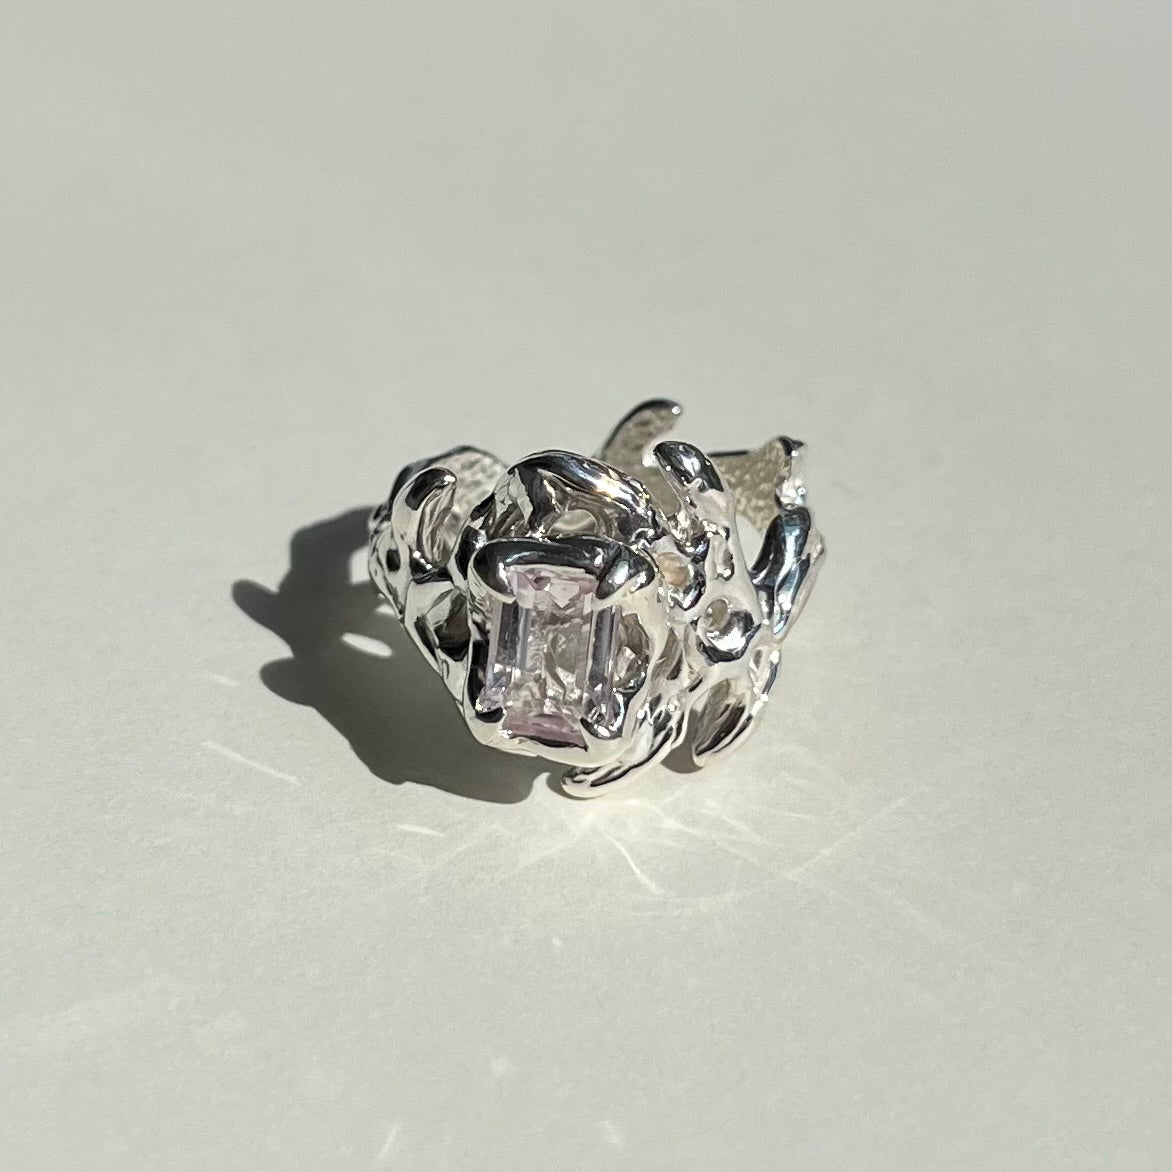 KHAOS sterling silver and Kunzite ring XII